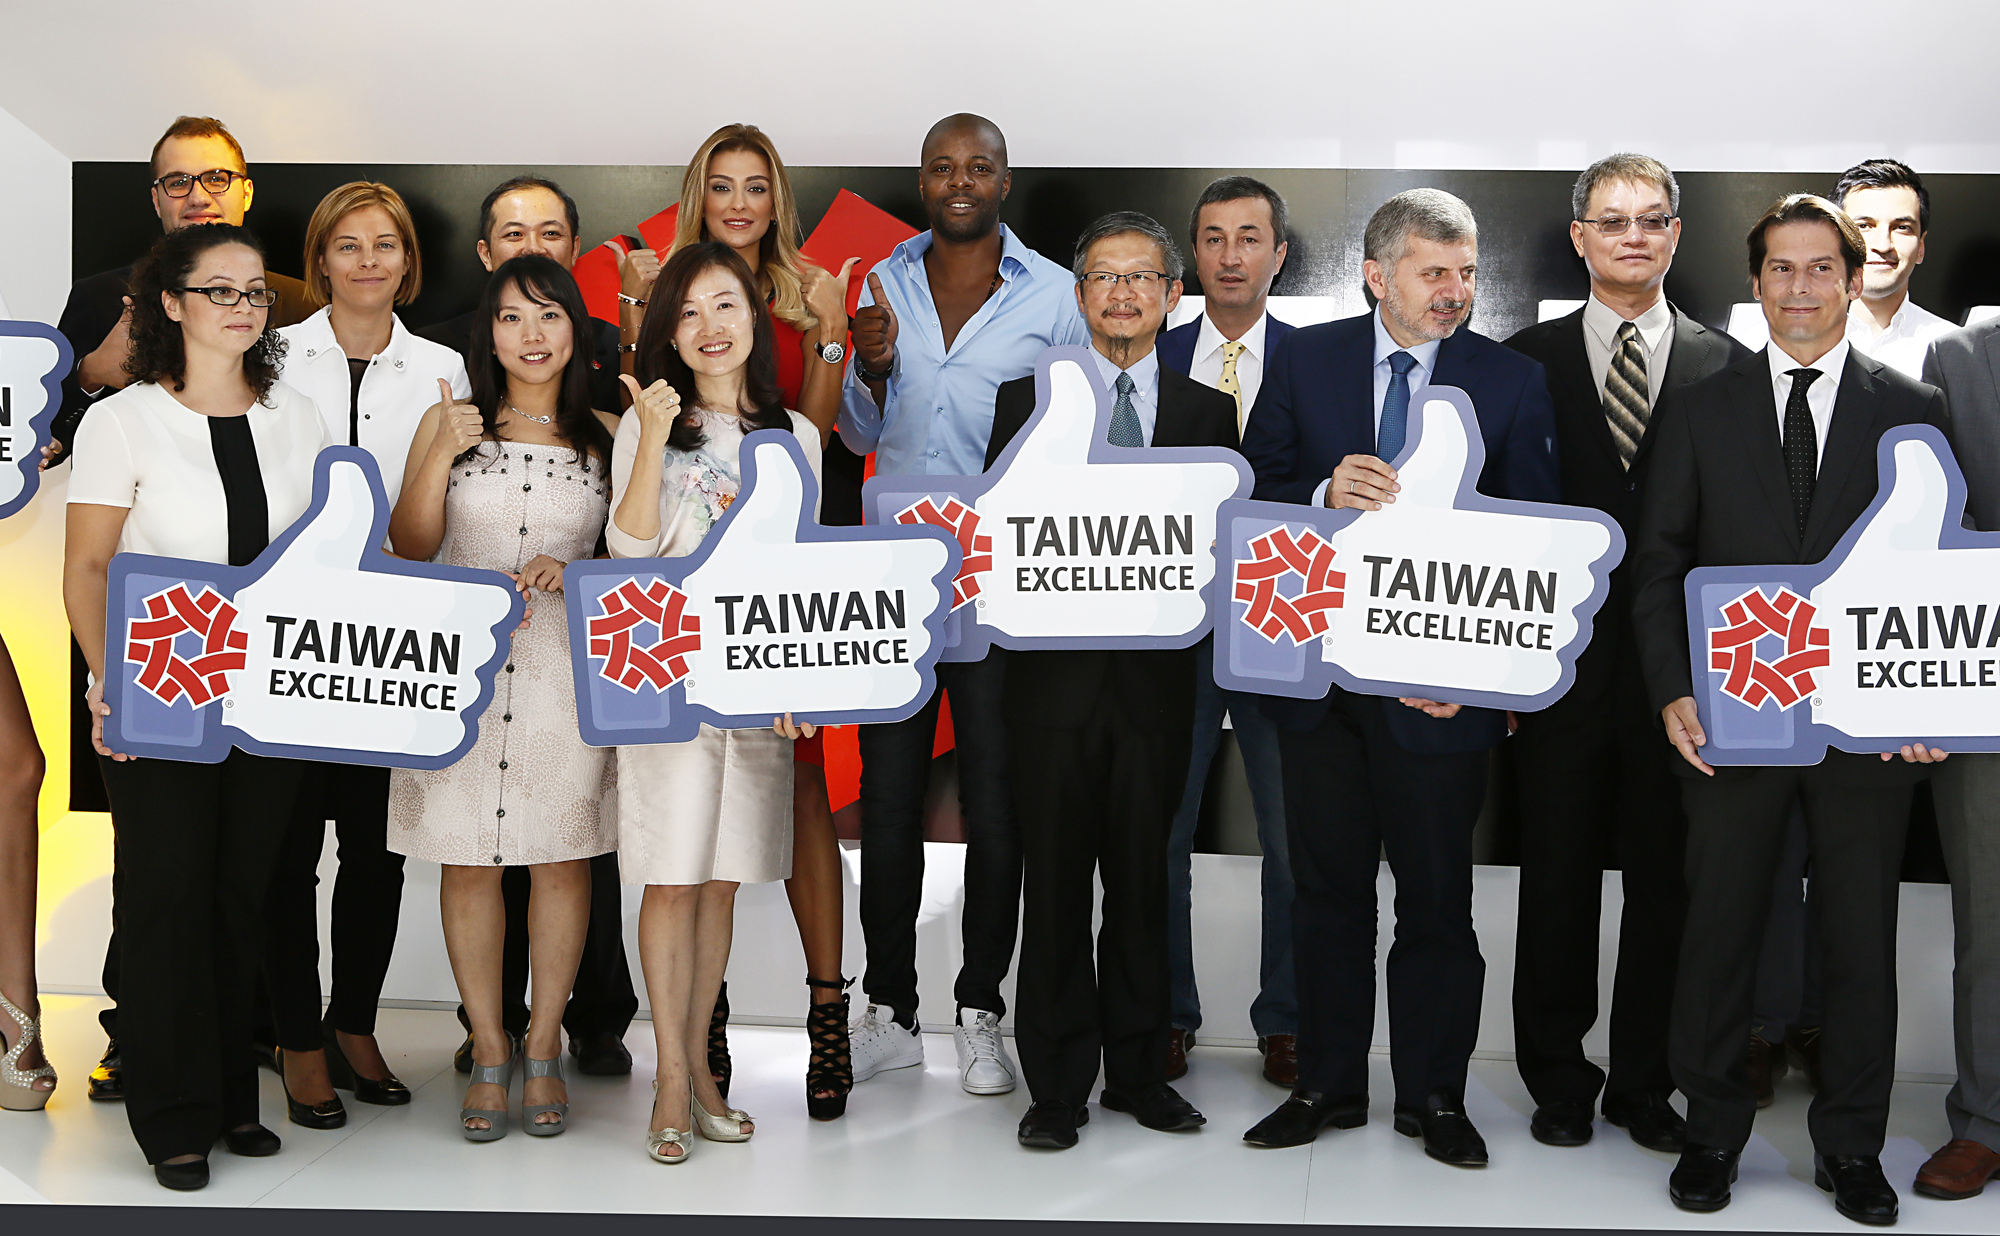 Taiwan Excellence 2014 - İstinye Park